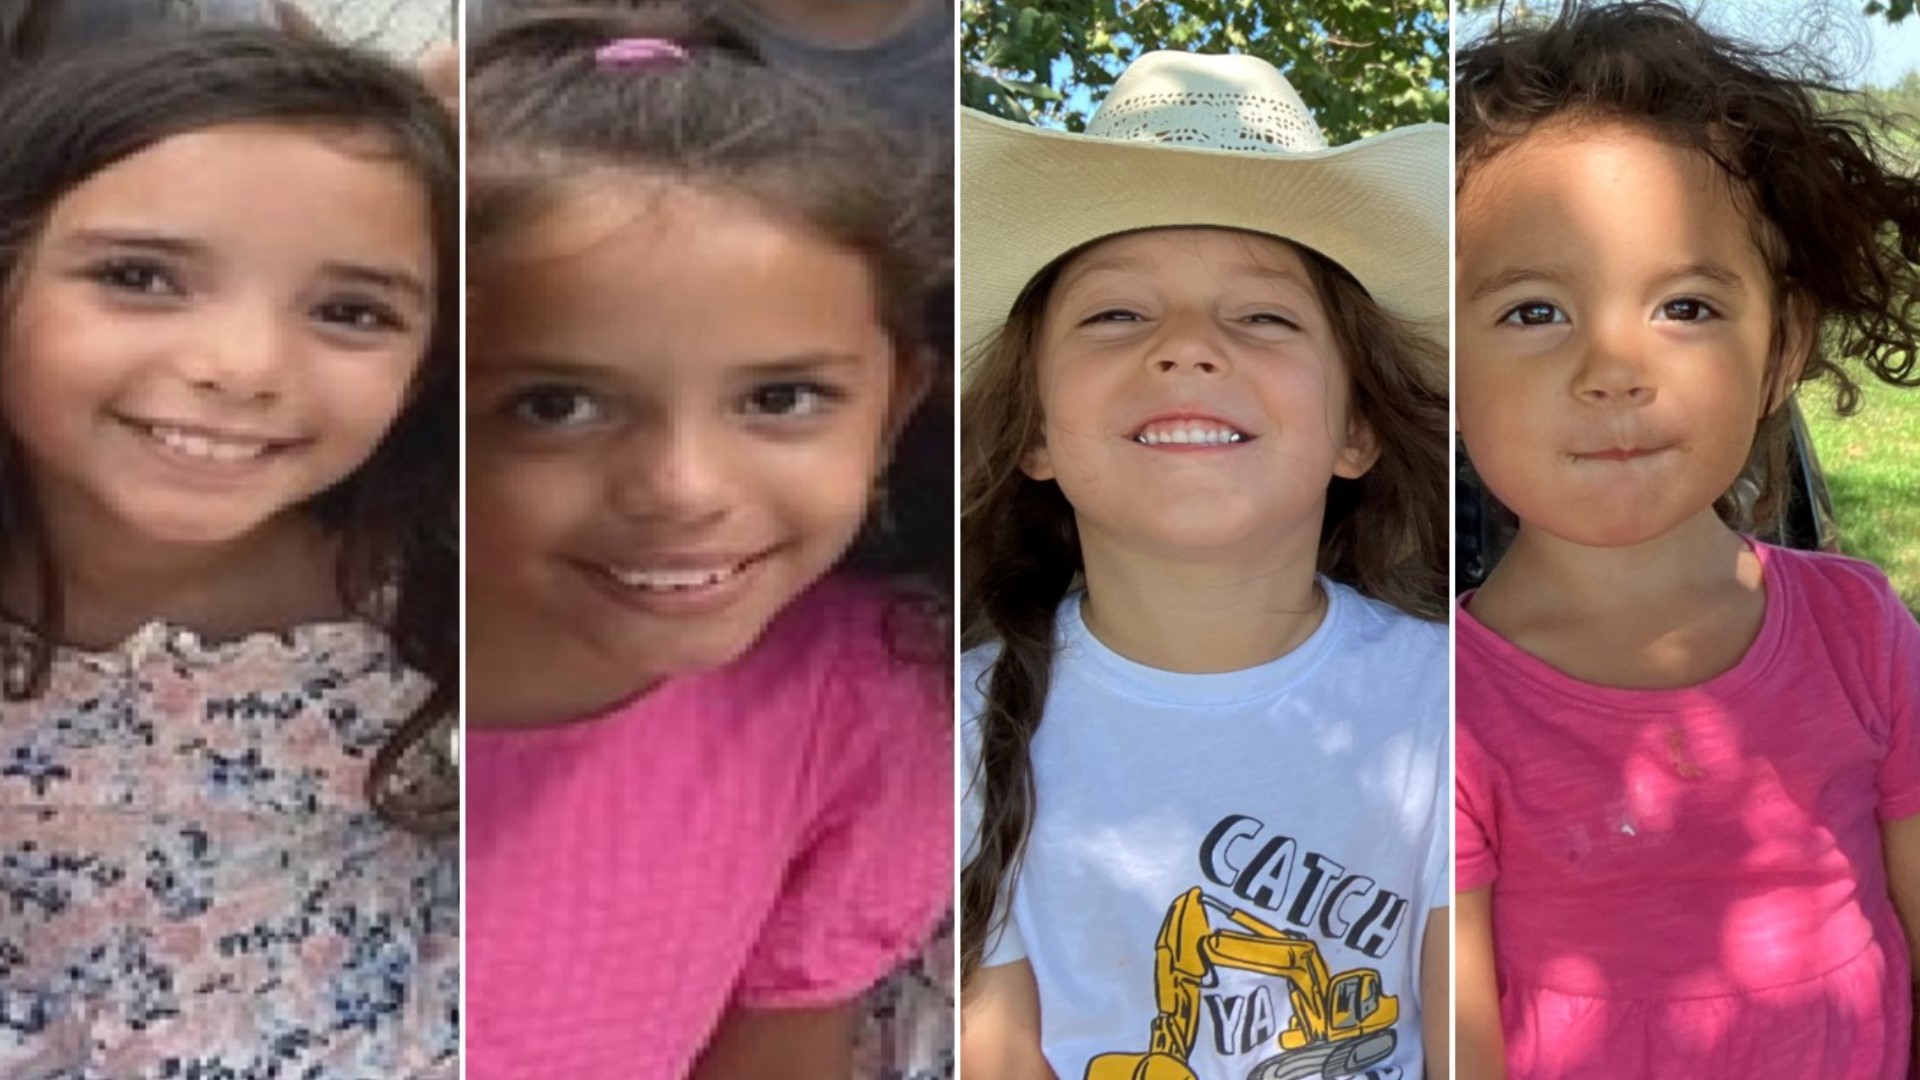 The children, 2-year-old Millie, 6-year-old Jackson and 9-year-old twin girls Ellie and Ivy, will be memorialized at The Crossing in Chesterfield on Friday.